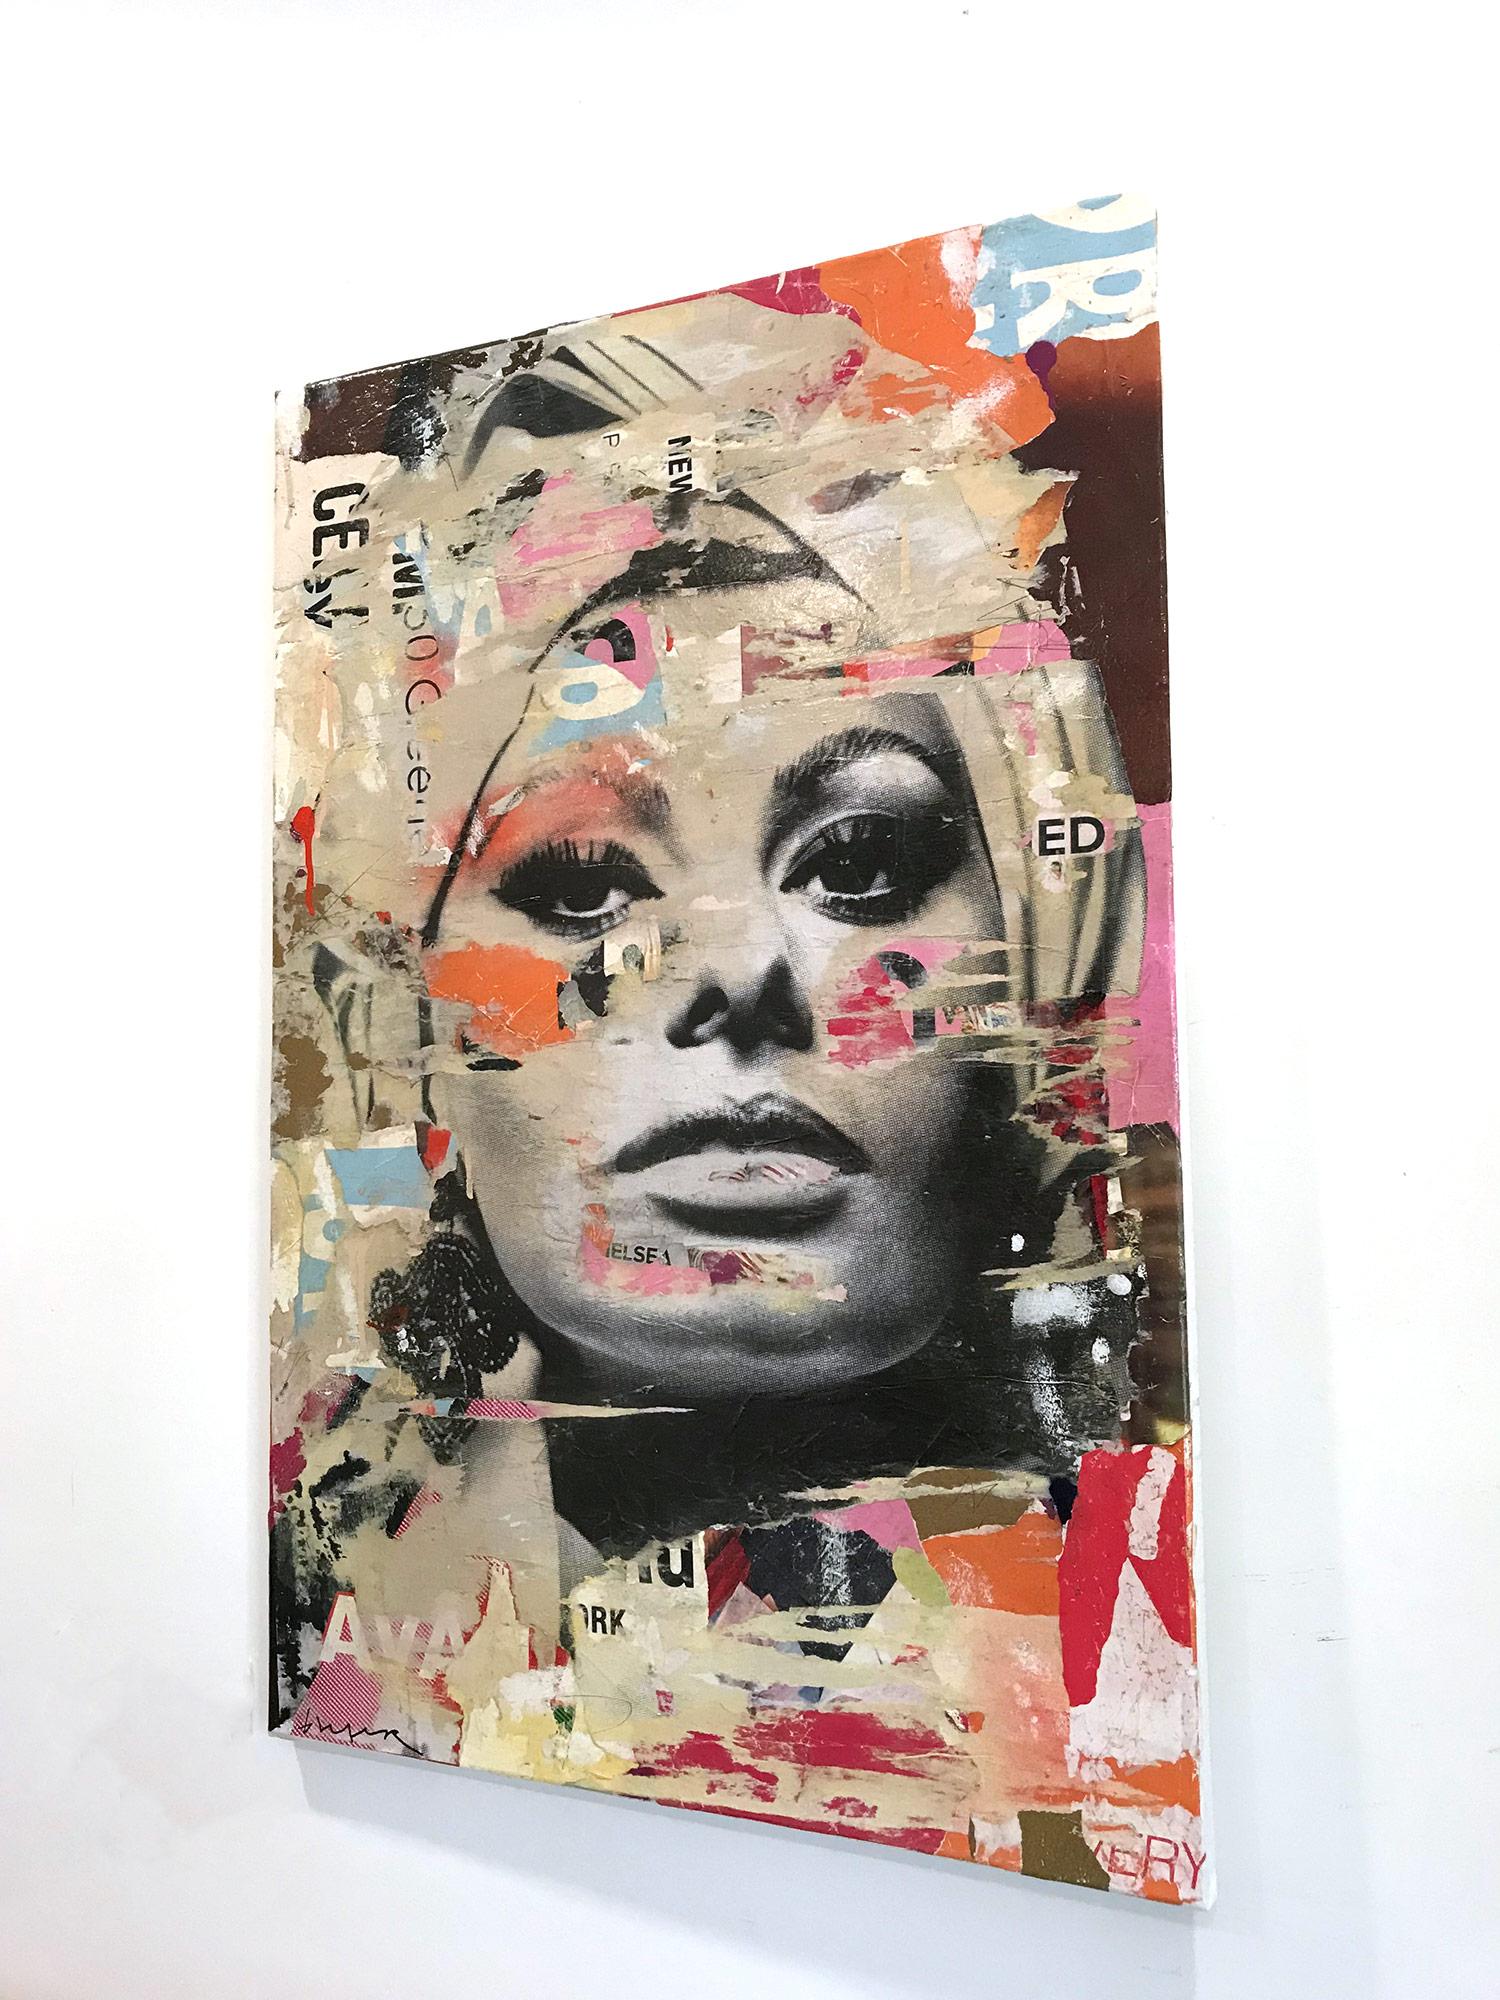 This piece depicts a famous French actress and model Sophia Loren. Done with beautiful expressive colors and a distinctive street art design, this piece pops with energy and romantic beauty. Its composition and bold collage makes a wonderful